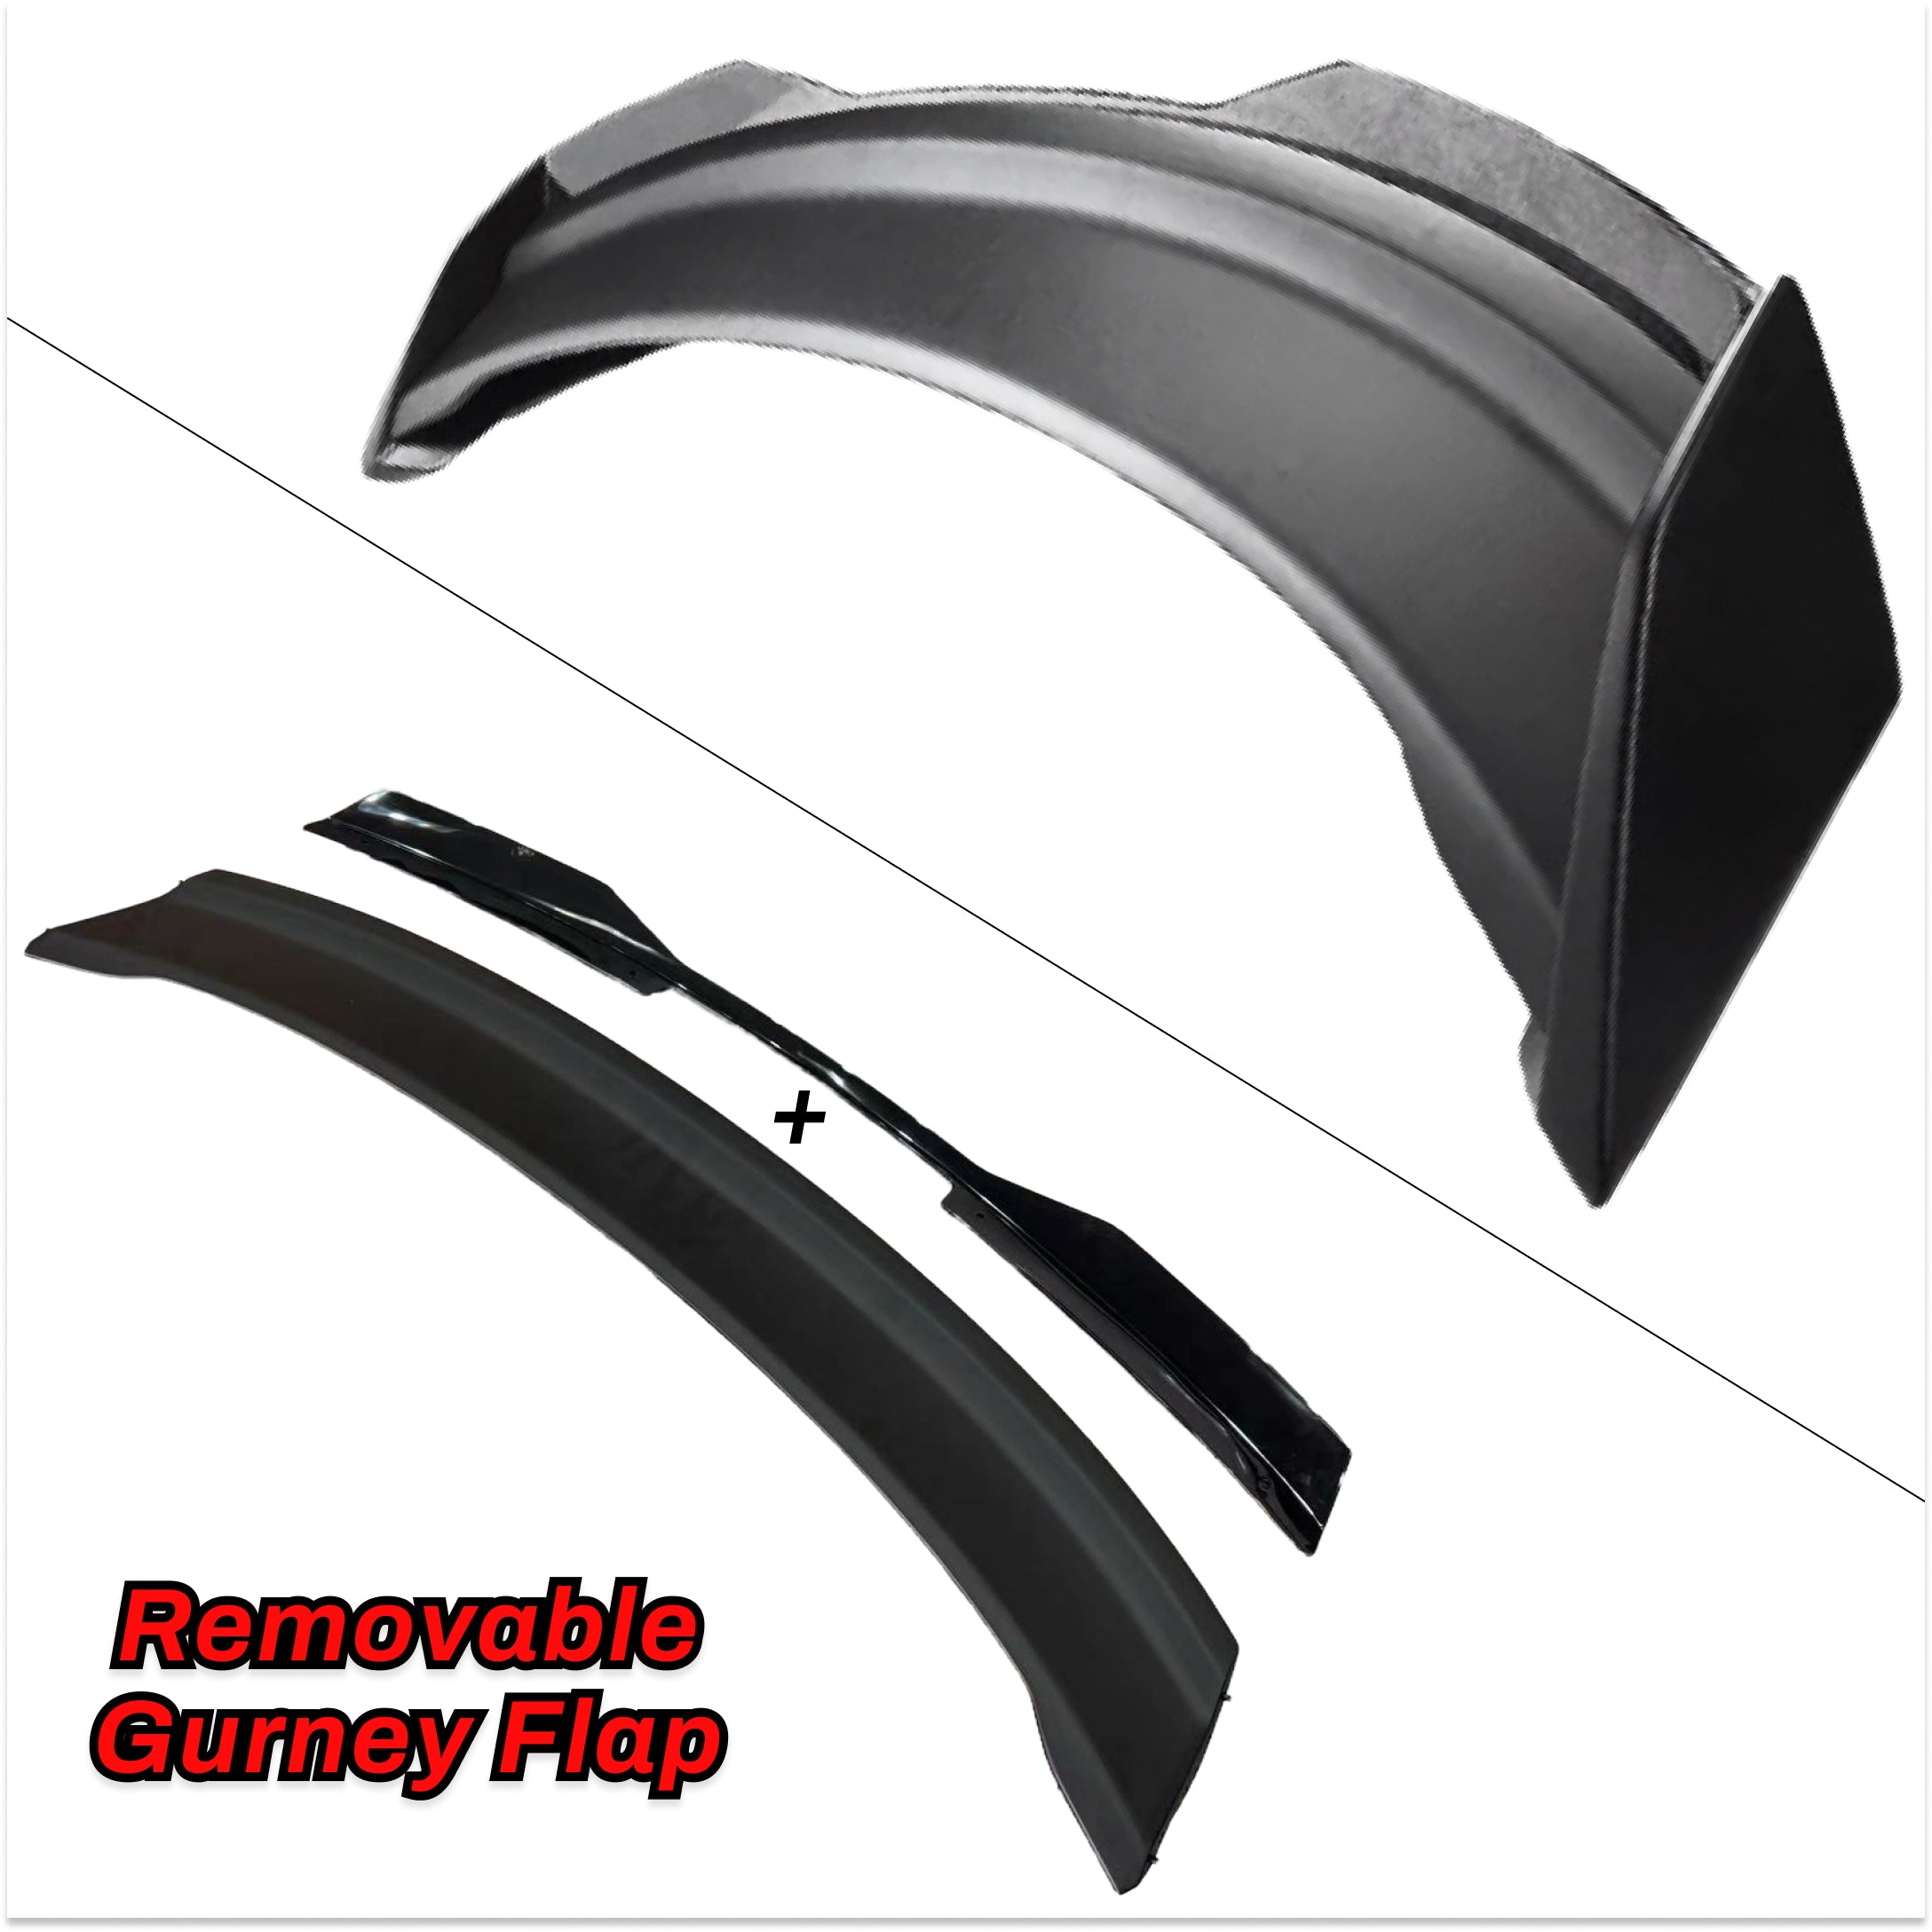 Removabel Gourney Flap